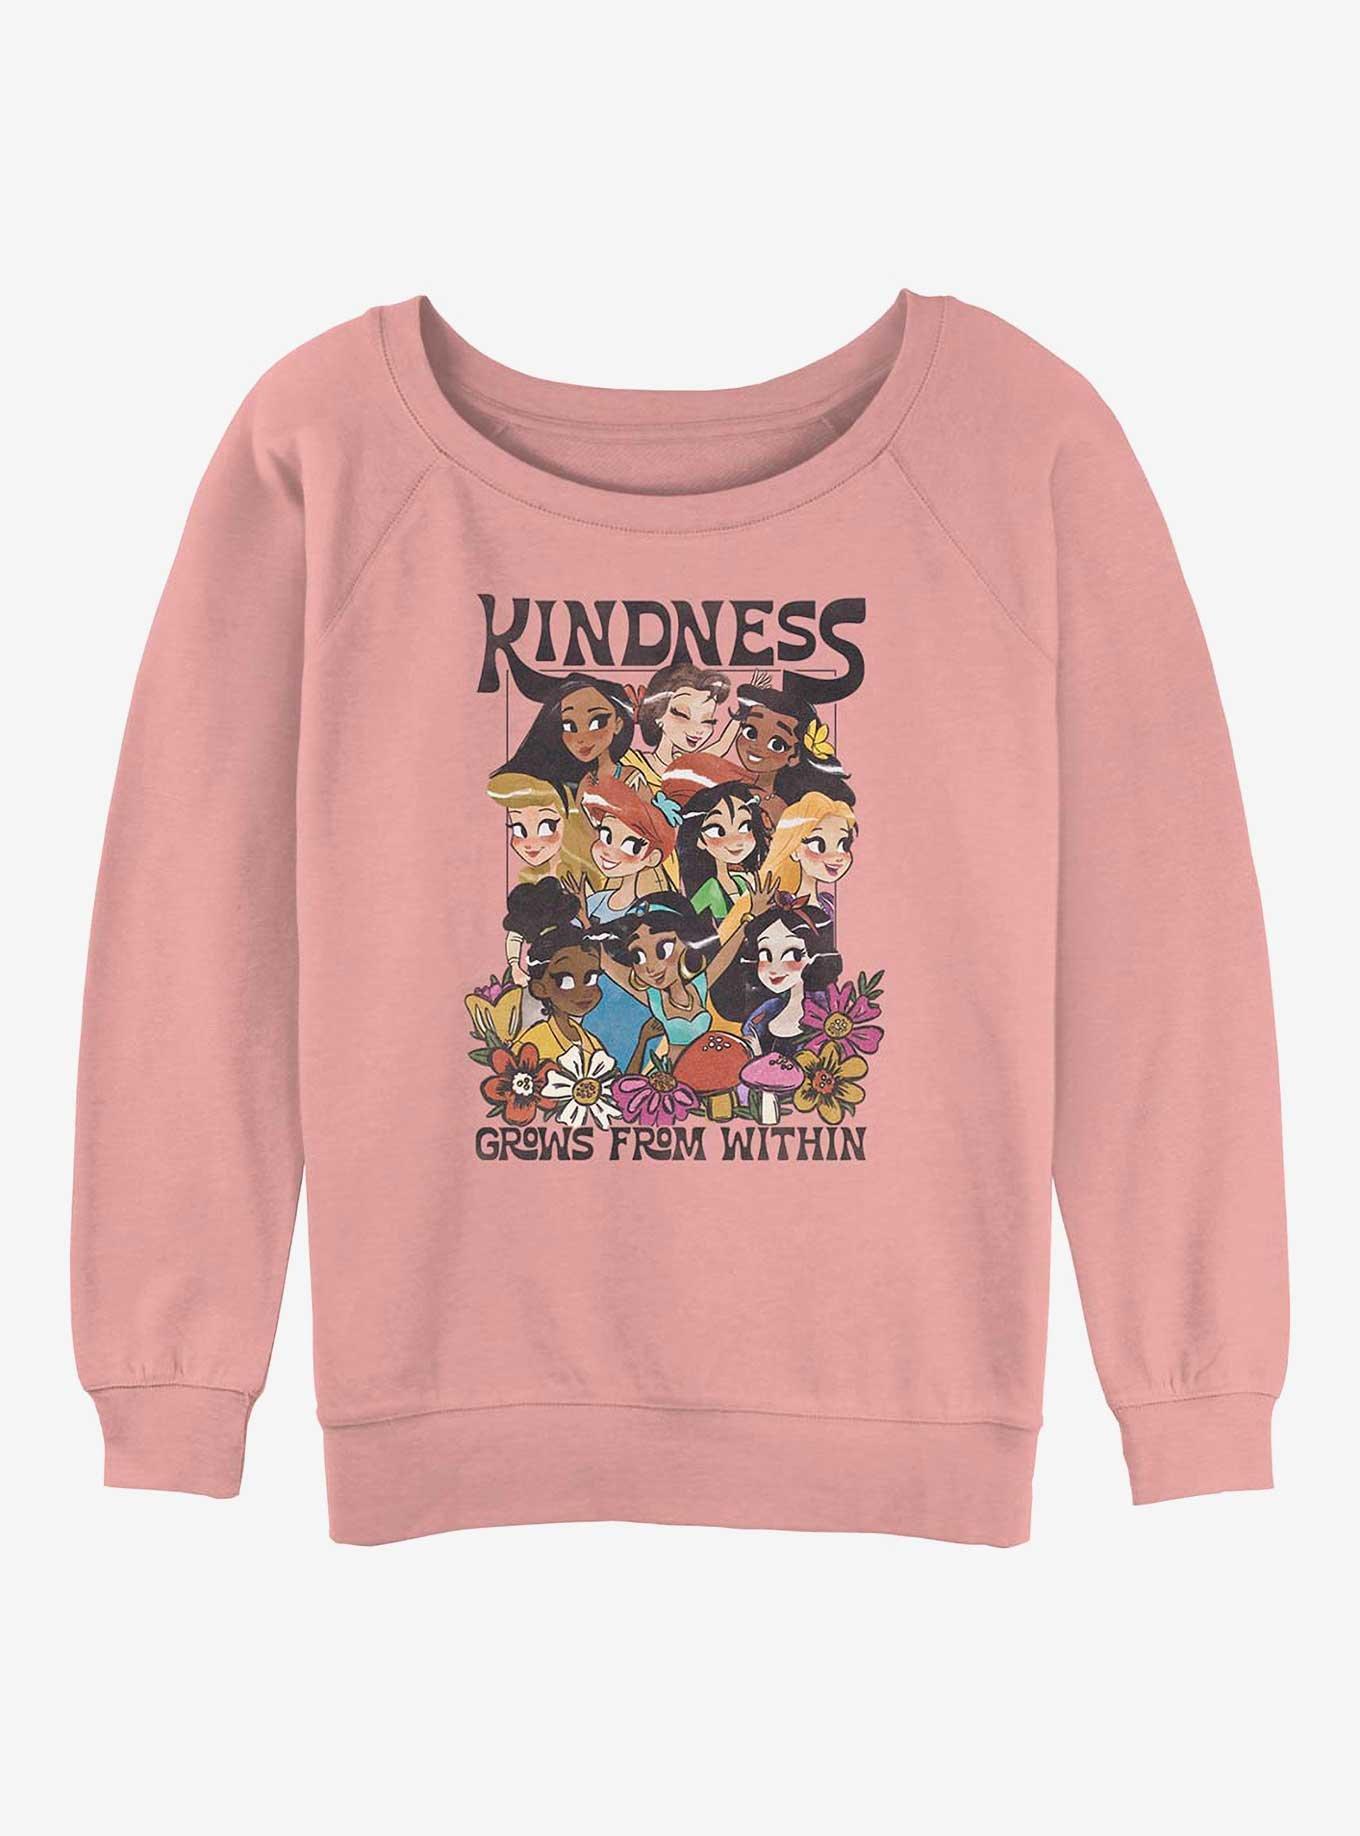 Disney Pocahontas Kindness Grows From Within Girls Slouchy Sweatshirt